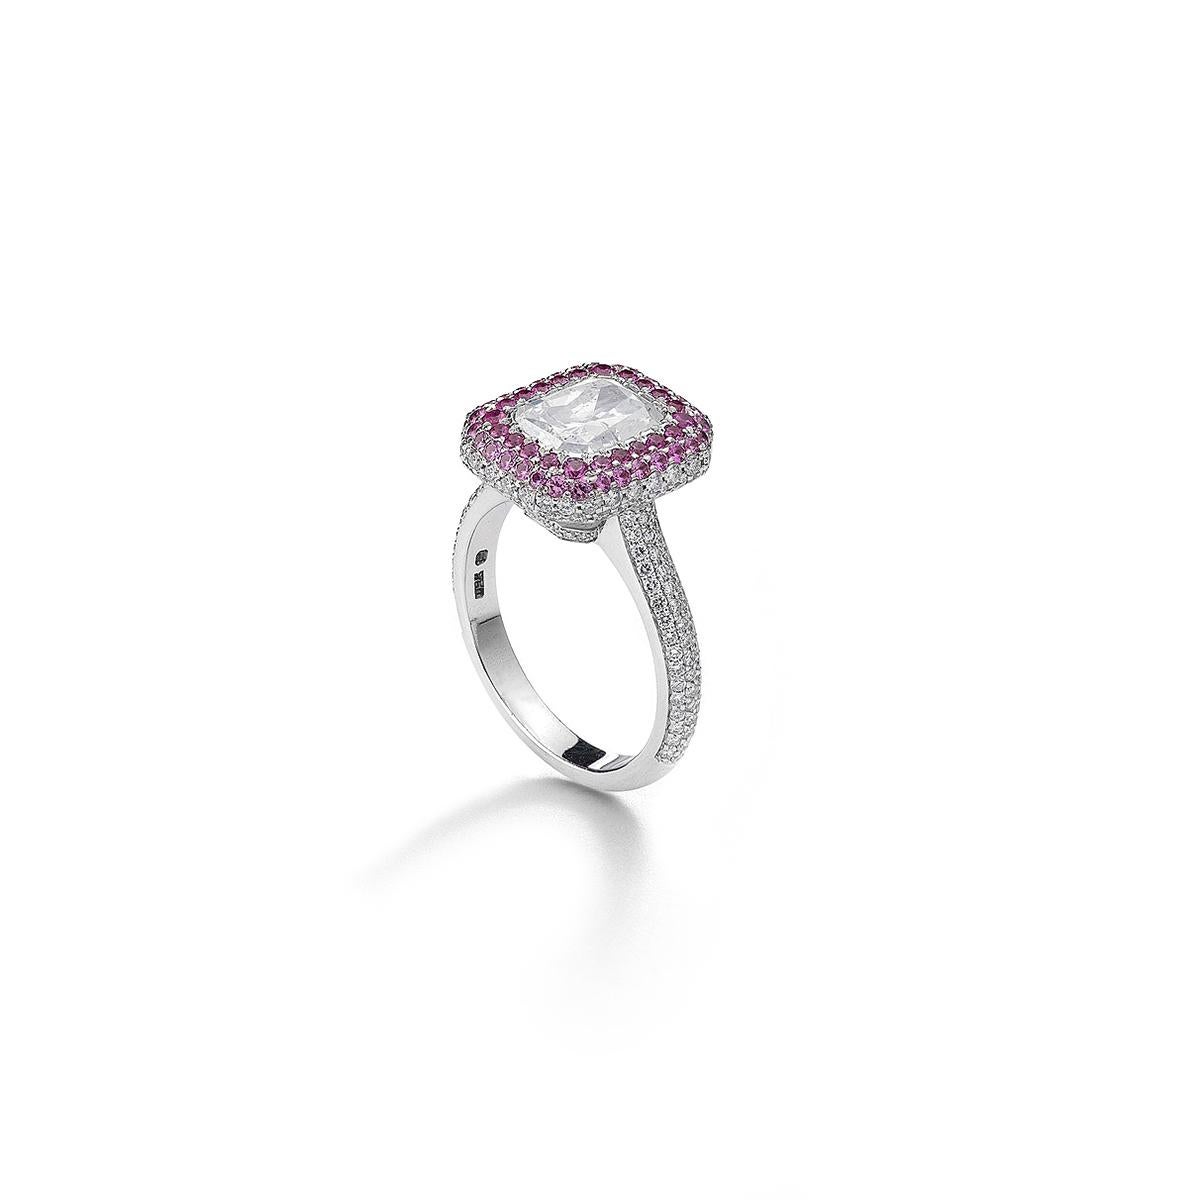 Ring in 18kt white gold set with one Fancy While Even diamond 2.00 cts, 52  pink sapphires 0.56 cts and 172 diamonds 0.79 cts gia Certificate Size 53               